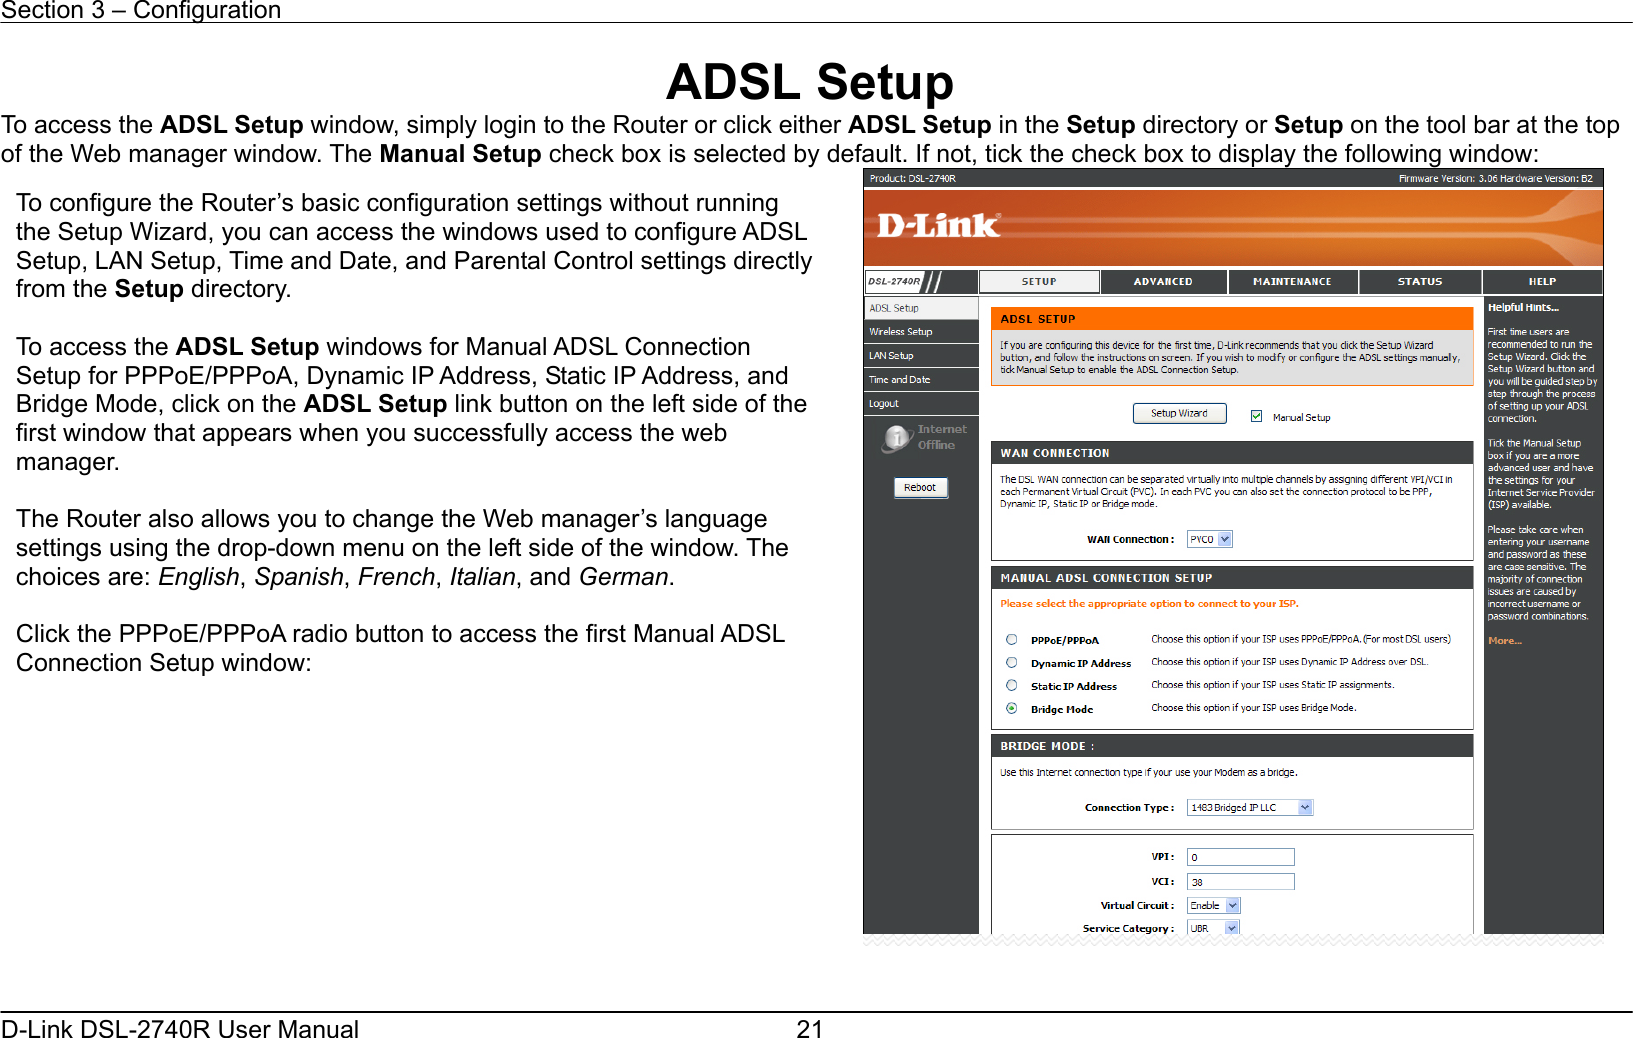 Section 3 – Configuration   D-Link DSL-2740R User Manual  21ADSL Setup To access the ADSL Setup window, simply login to the Router or click either ADSL Setup in the Setup directory or Setup on the tool bar at the top of the Web manager window. The Manual Setup check box is selected by default. If not, tick the check box to display the following window:    To configure the Router’s basic configuration settings without running the Setup Wizard, you can access the windows used to configure ADSL Setup, LAN Setup, Time and Date, and Parental Control settings directly from the Setup directory.    To access the ADSL Setup windows for Manual ADSL Connection Setup for PPPoE/PPPoA, Dynamic IP Address, Static IP Address, and Bridge Mode, click on the ADSL Setup link button on the left side of the first window that appears when you successfully access the web manager.   The Router also allows you to change the Web manager’s language settings using the drop-down menu on the left side of the window. The choices are: English, Spanish, French, Italian, and German.  Click the PPPoE/PPPoA radio button to access the first Manual ADSL Connection Setup window: 